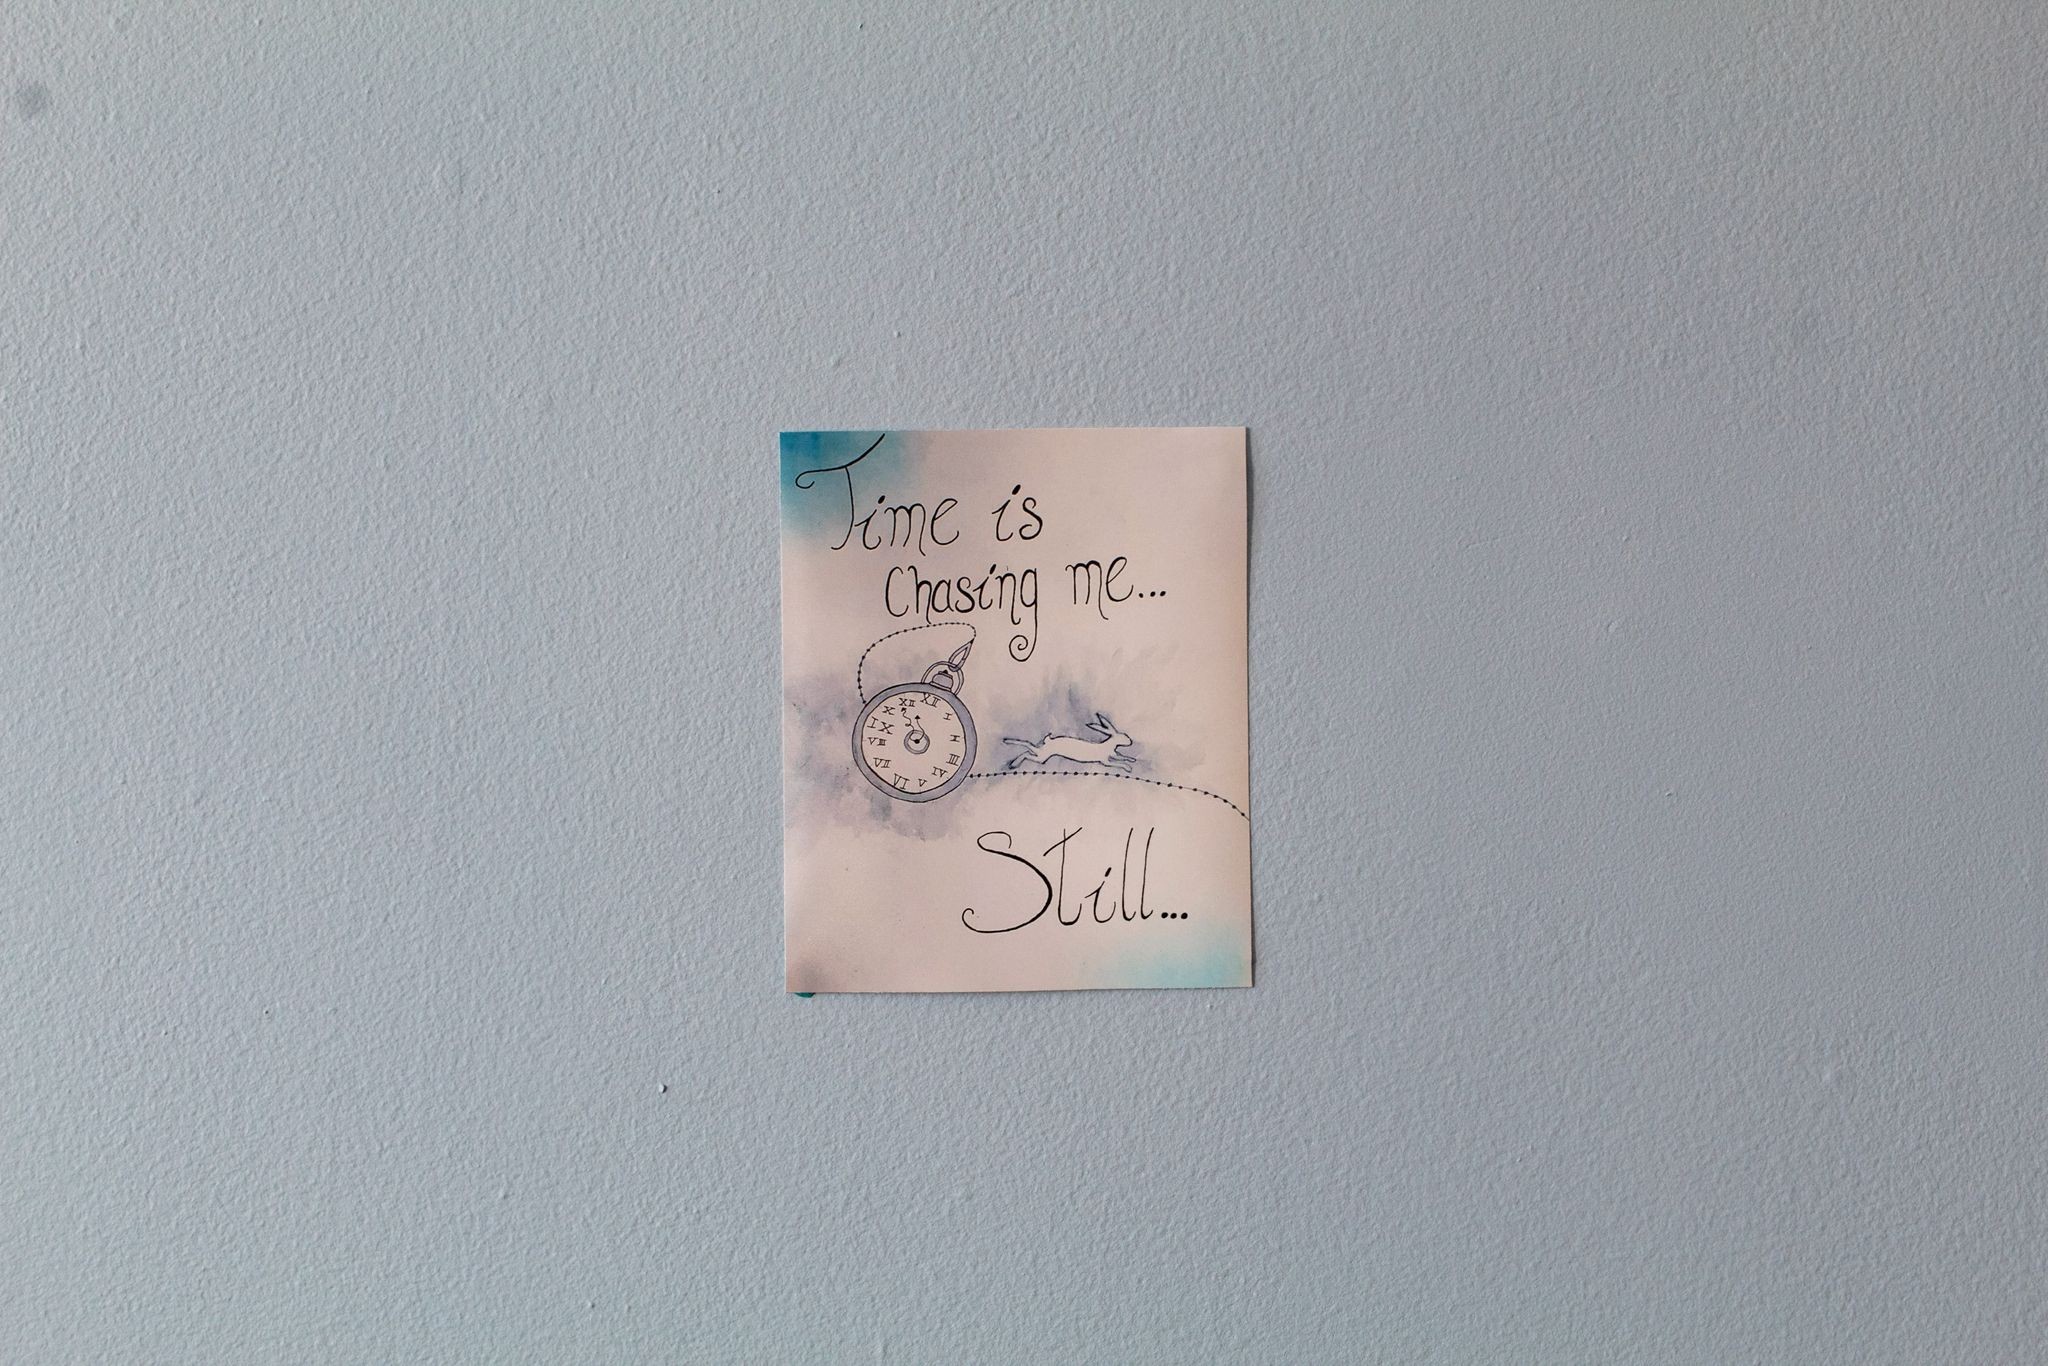 Product image of "Time is Chasing Me" print hung up on a pale blue wall